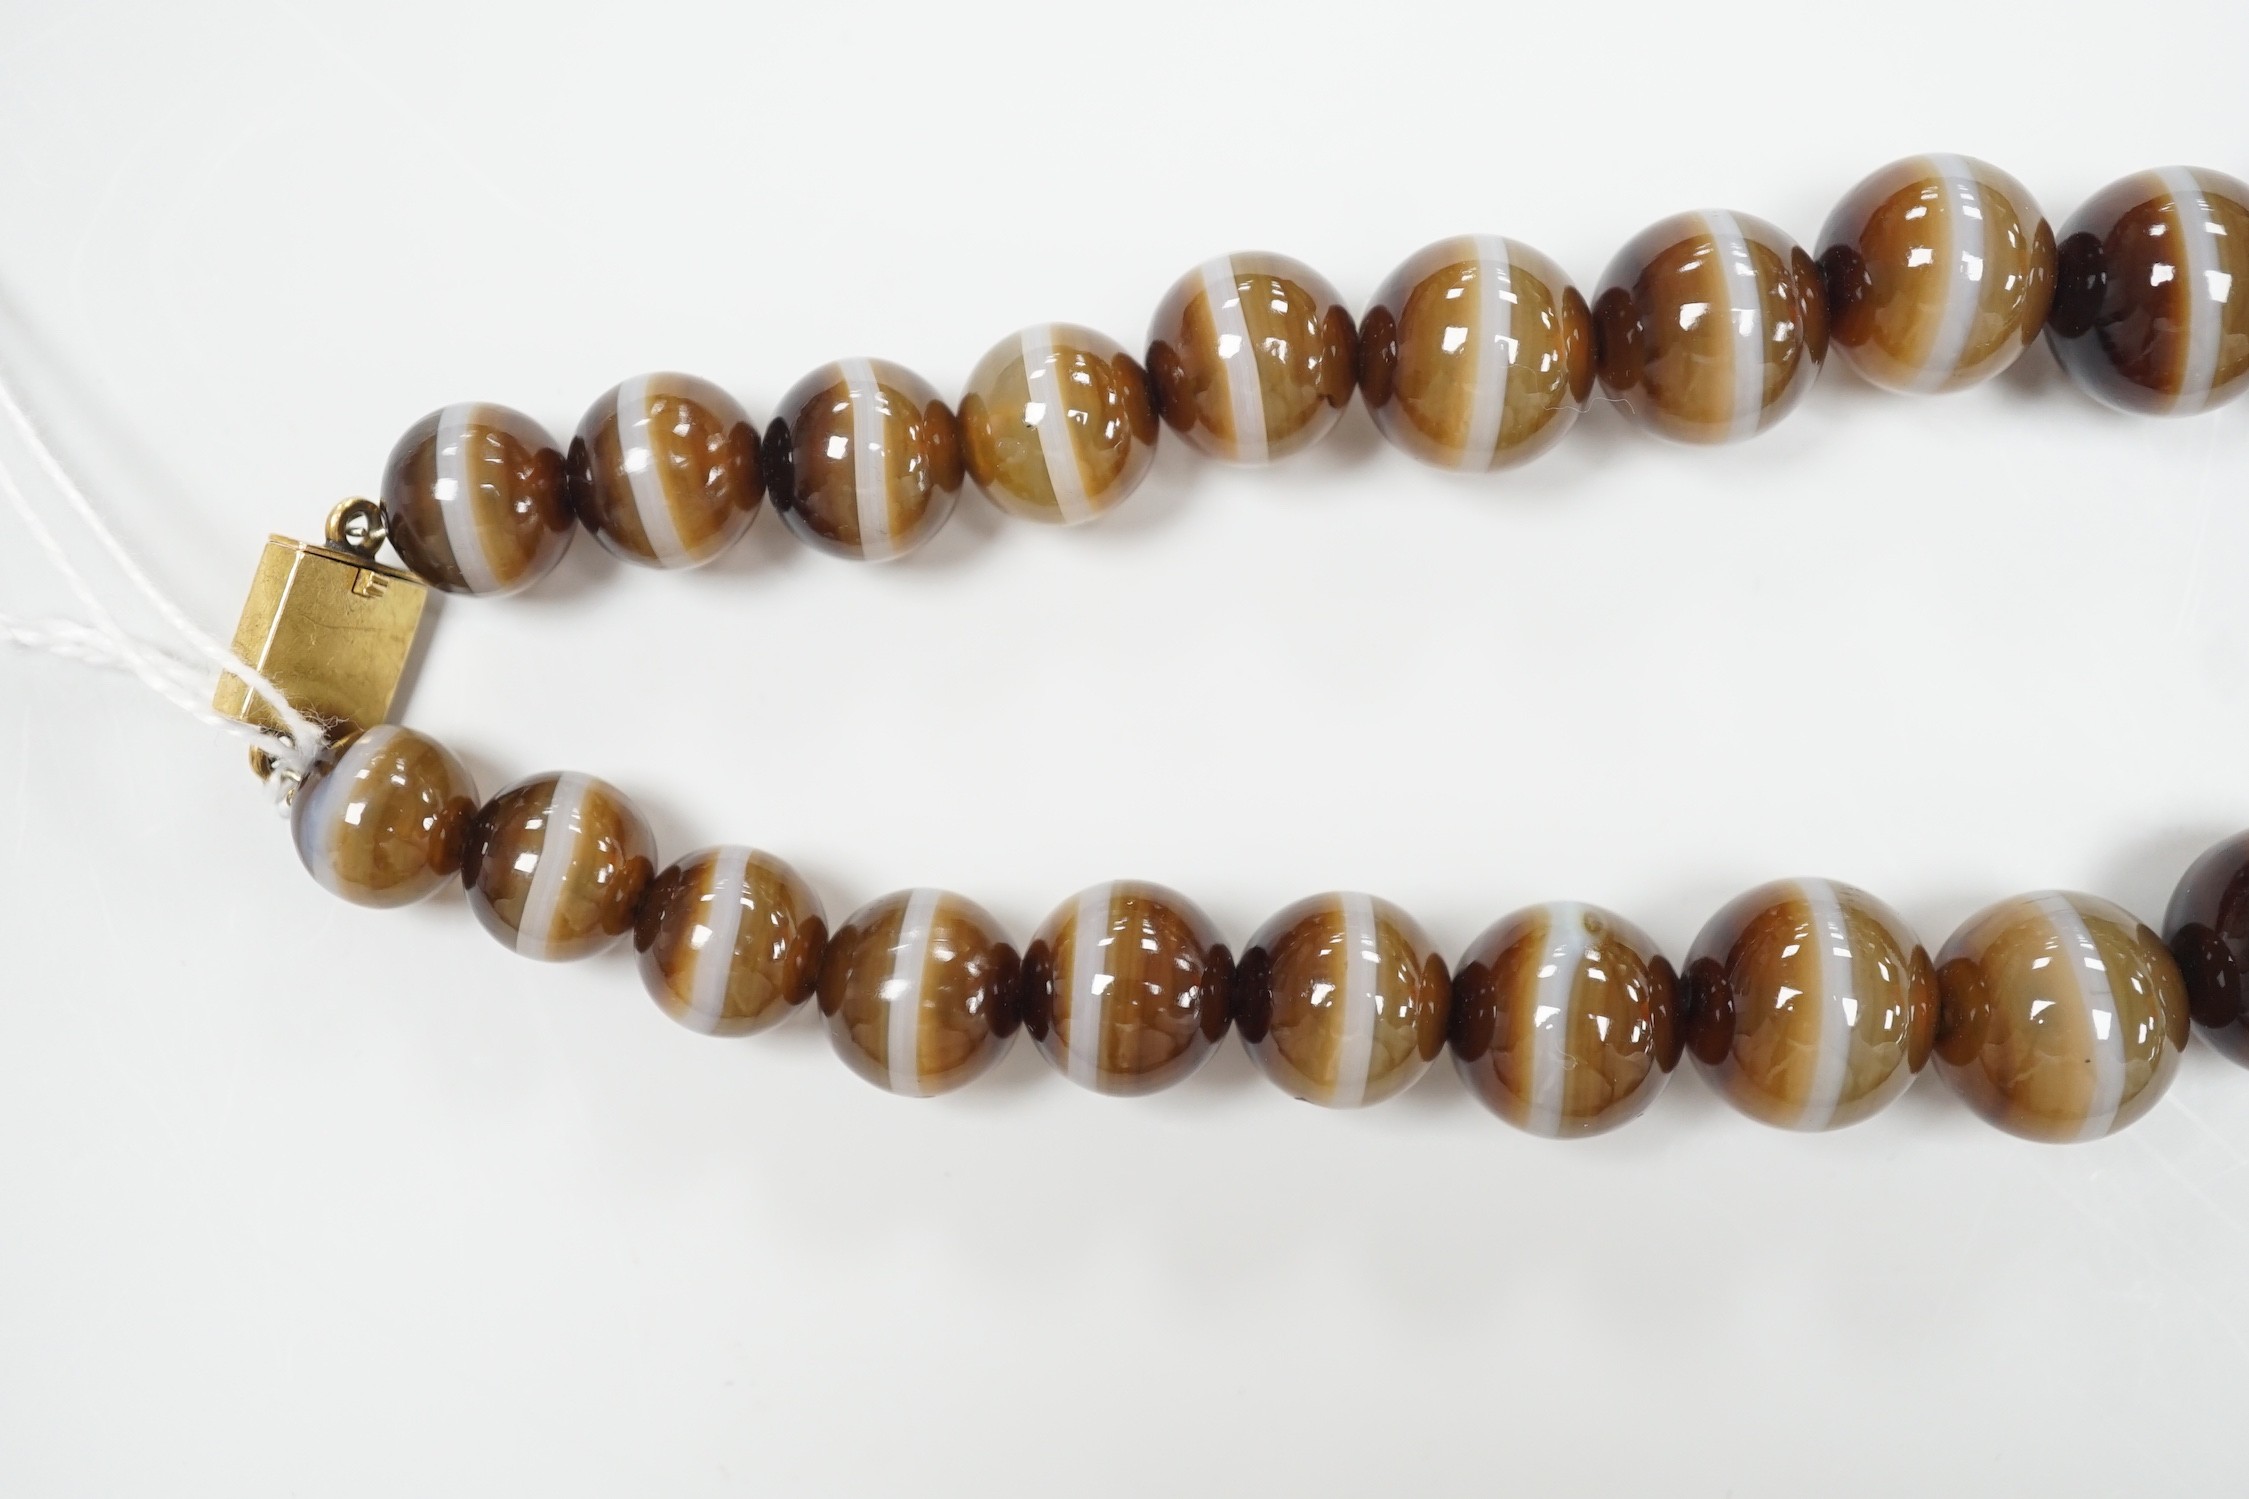 A single strand graduated banded agate circular bead necklace with yellow metal clasp, 46cm. - Image 5 of 7